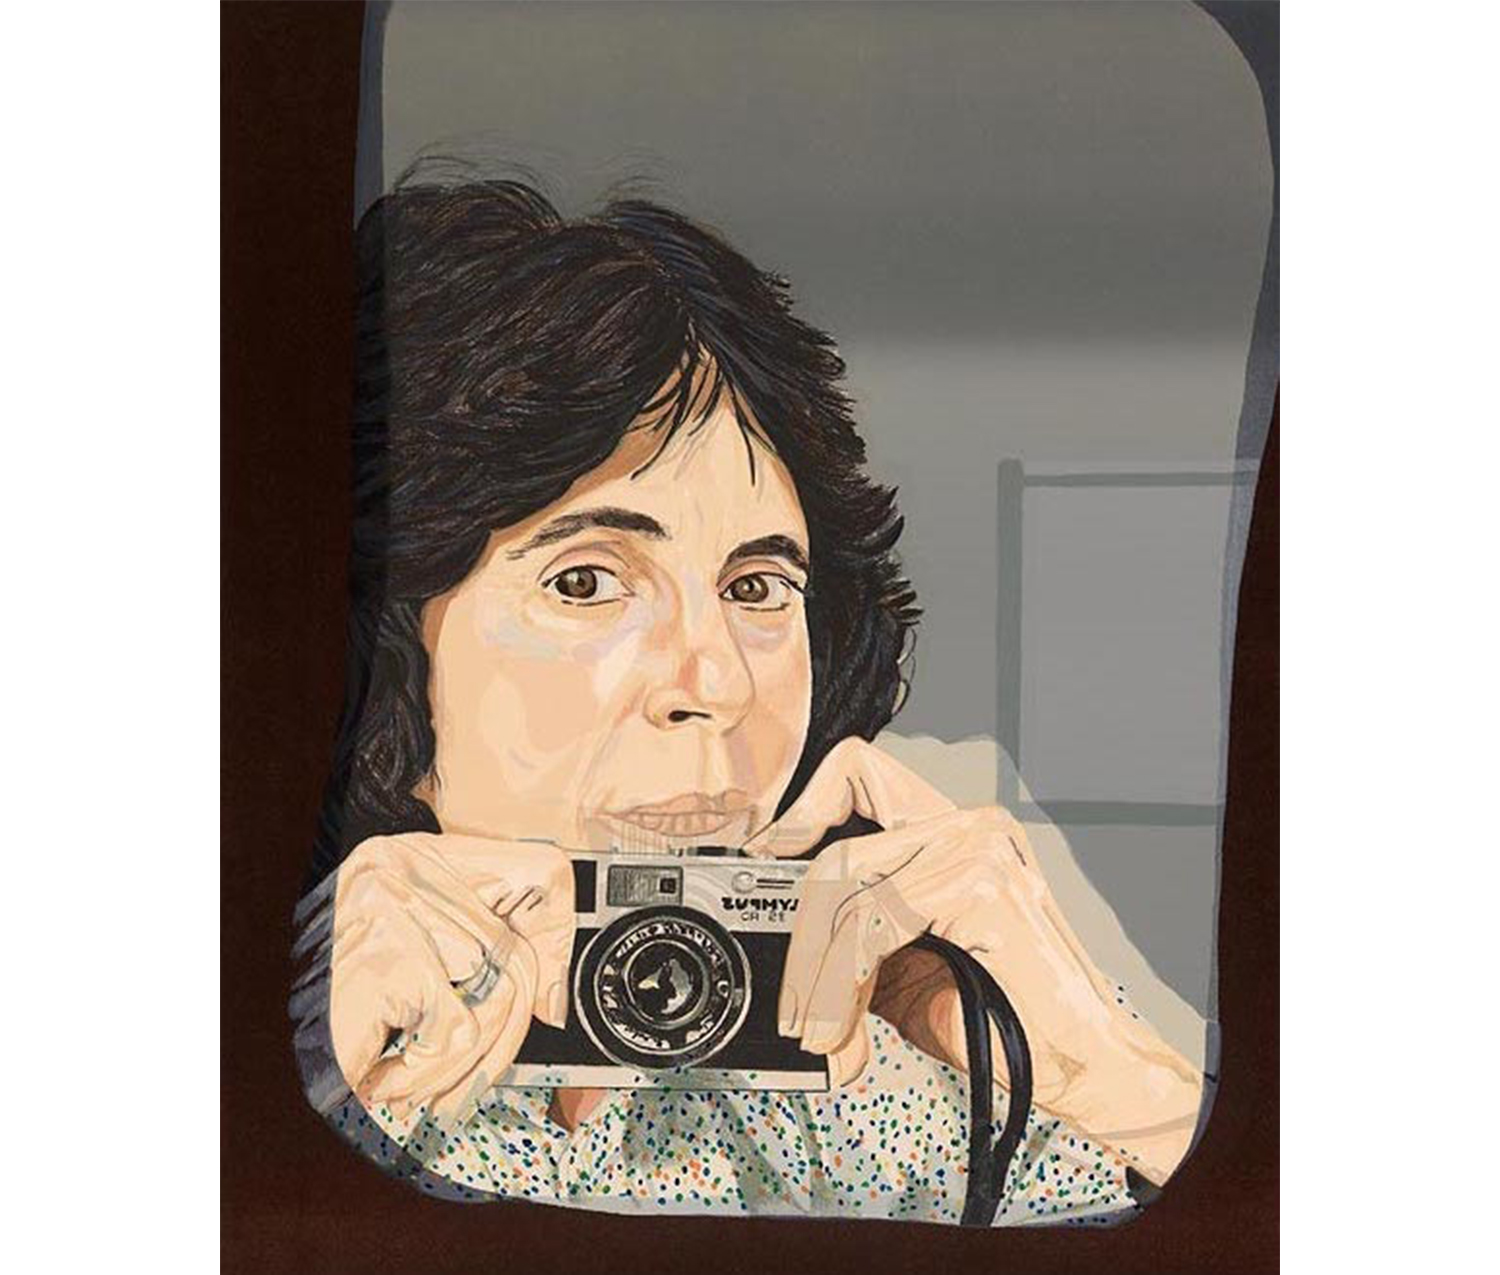 close-up of young woman with dark mid-length hair and brown eyes, wearing white shirt with polka-dots seen in mirror taking a picture of herself with an Olympus camera